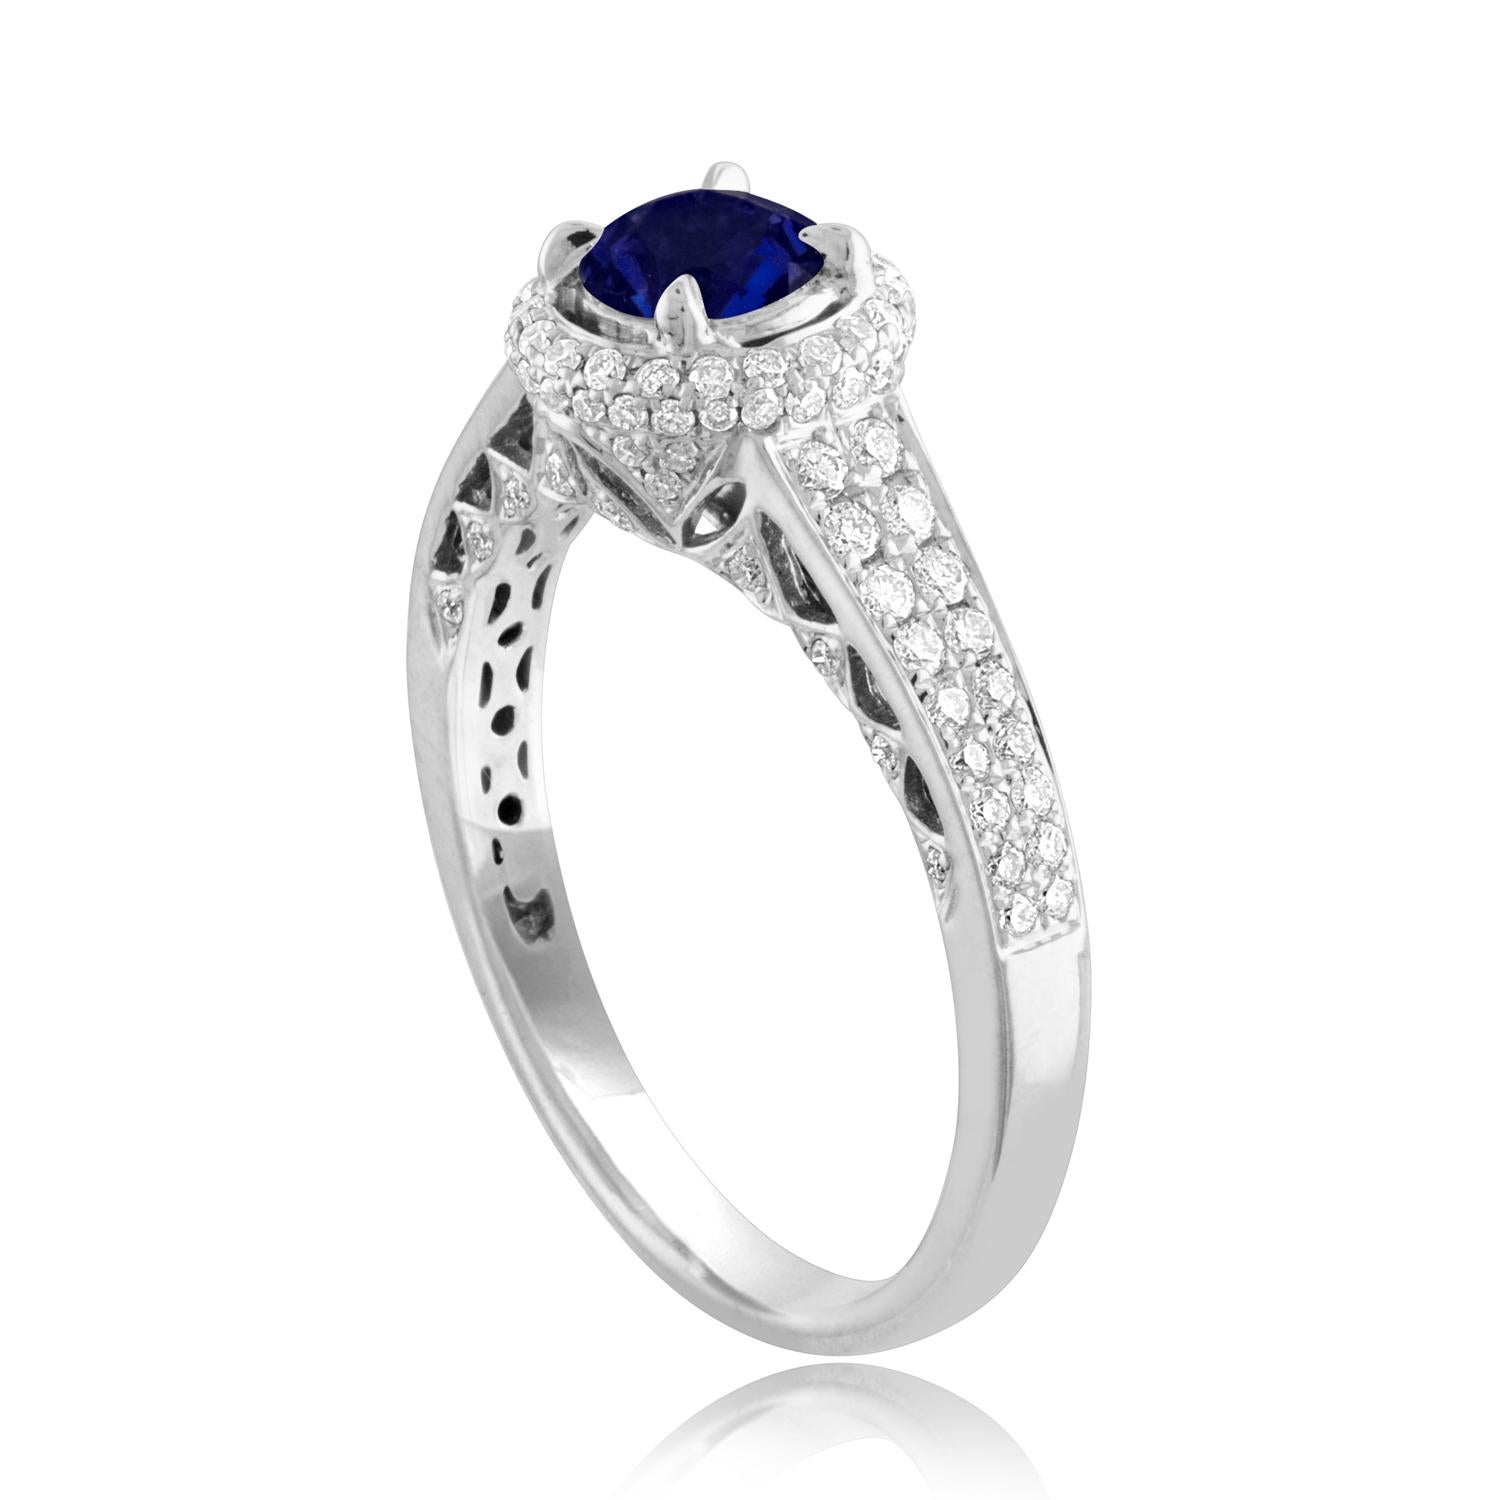 Beautiful Round Halo Pave Ring
The ring is 18K White Gold
The Center Stone is a Round Blue Sapphire 0.91 Carats
The Sapphire is AGL Certified Heated
There are 0.49 Carats in Diamonds F/G VS/SI
The ring is a size 7.00, sizable.
The ring weighs 3.9